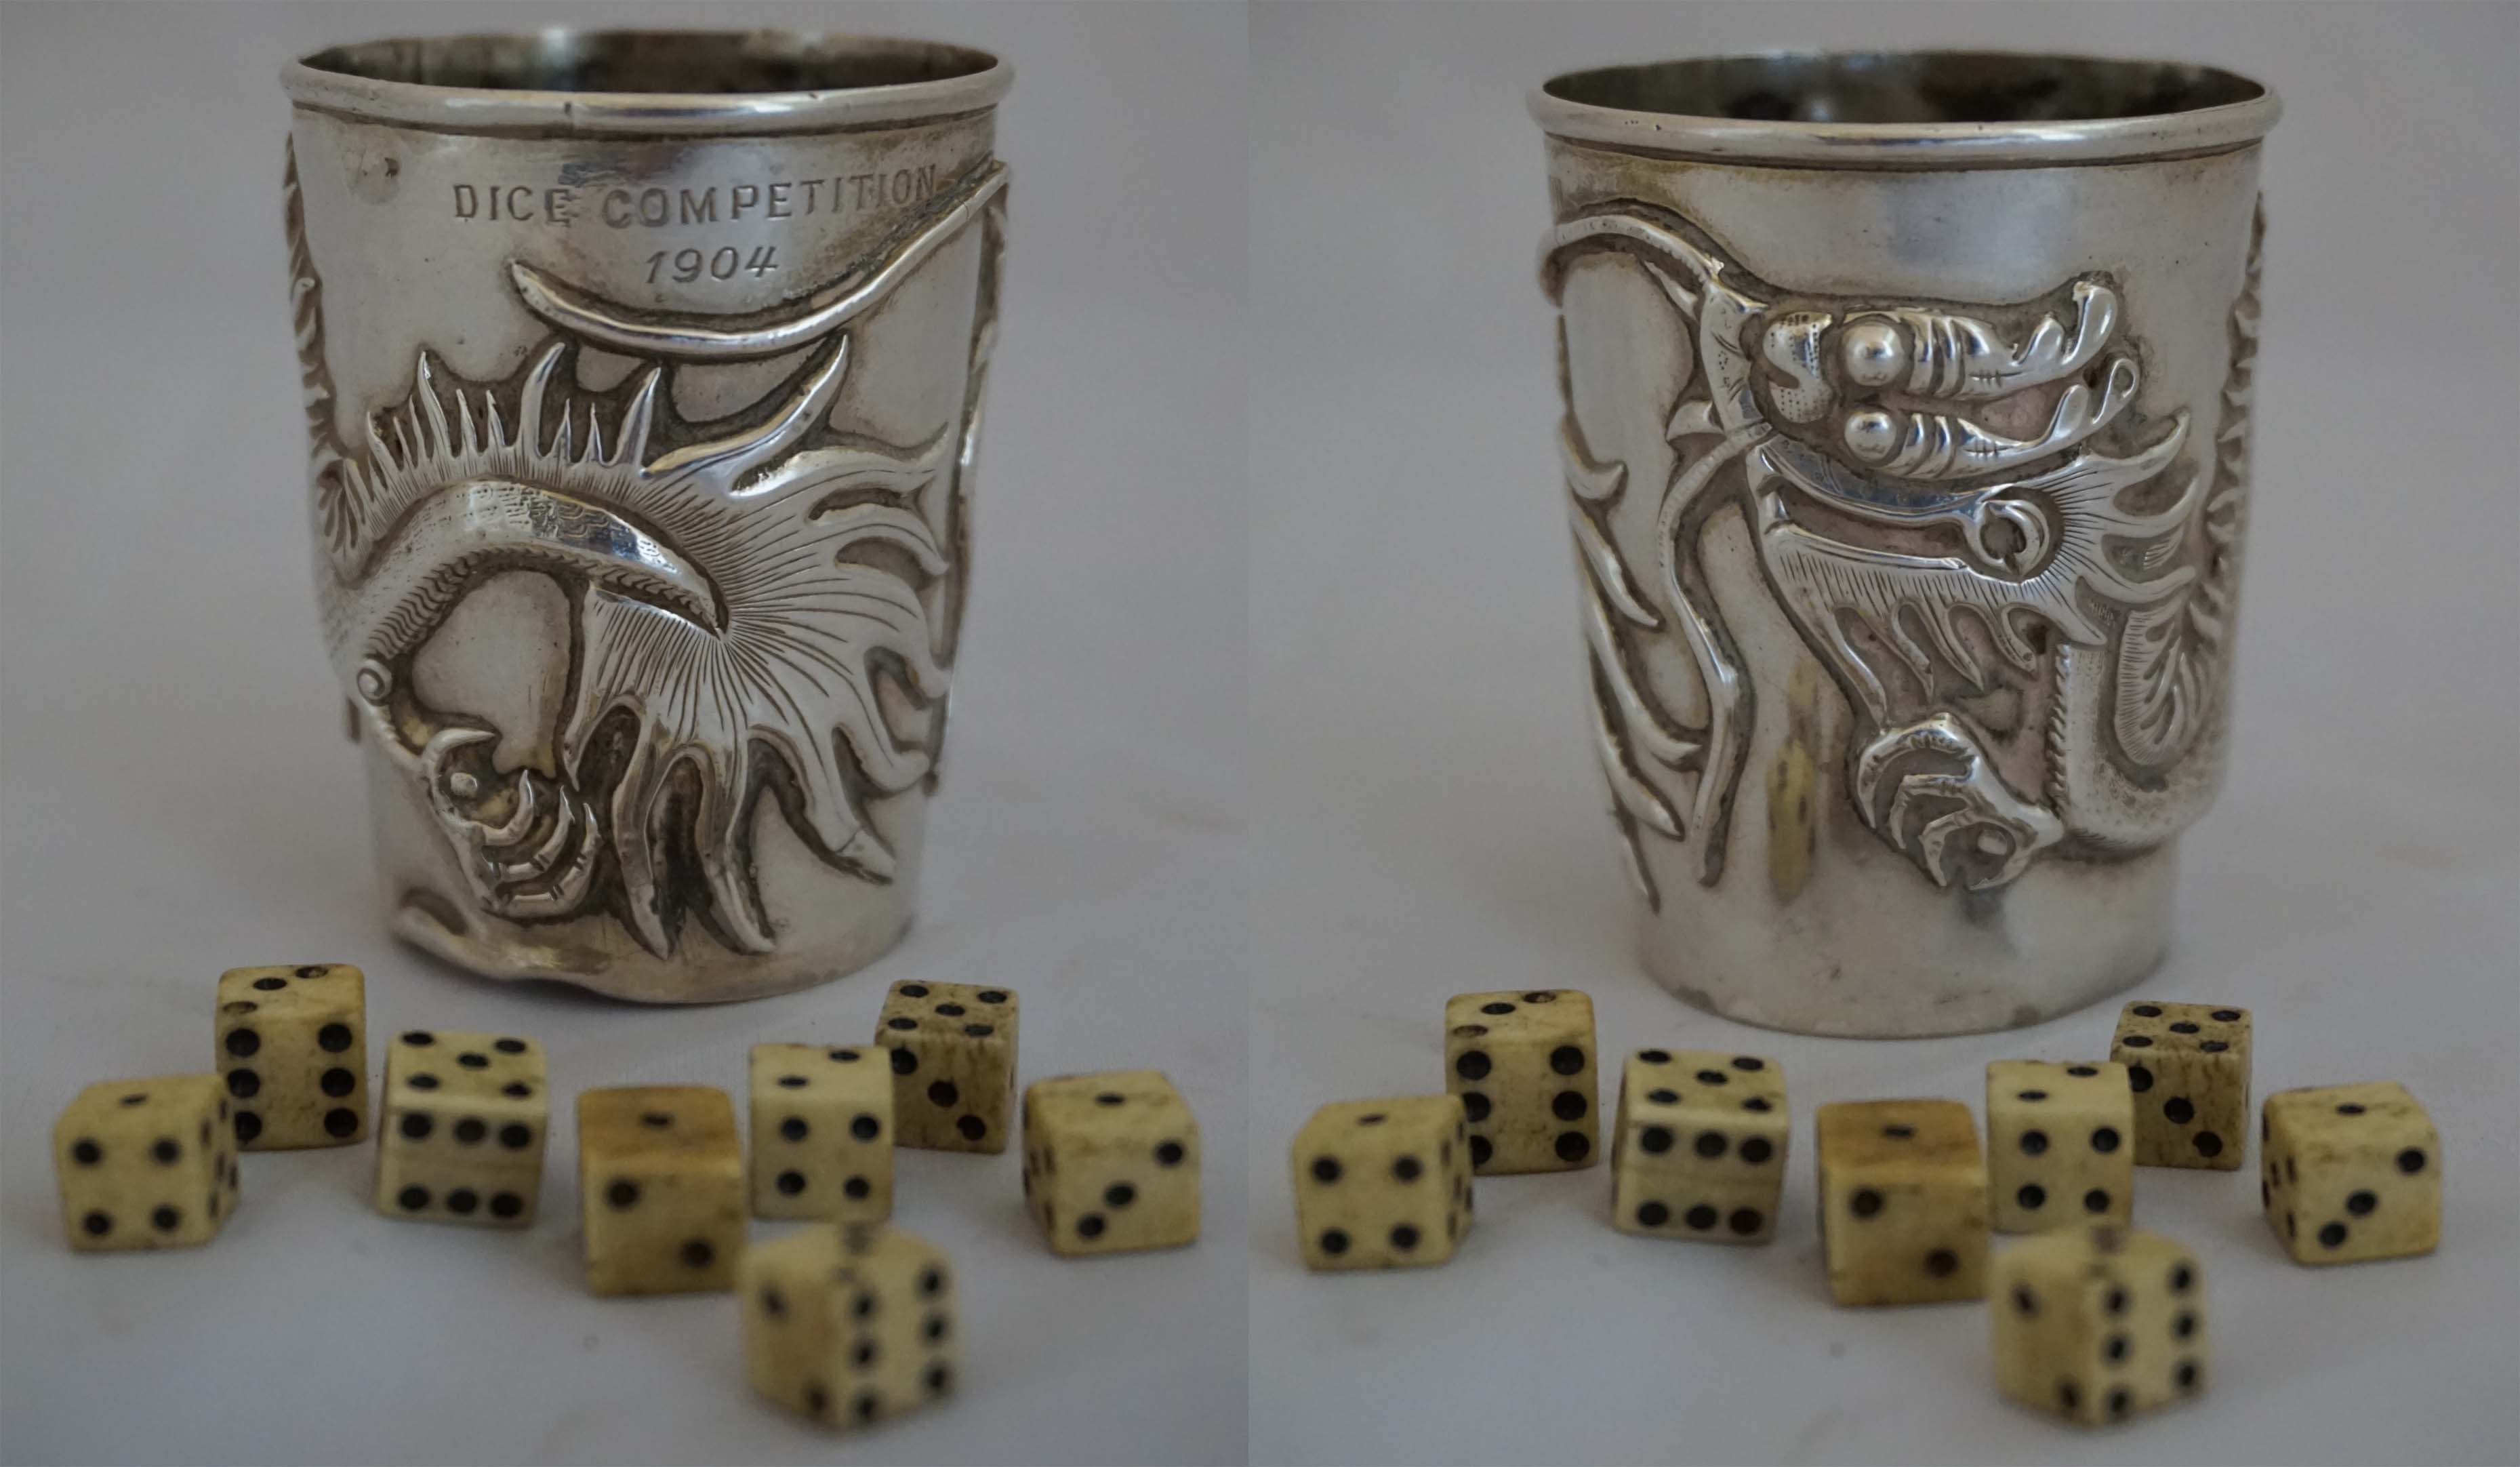 A Chinese export silver beaker or dice shaker, circa 1890, indistinct makers mark, of tapered